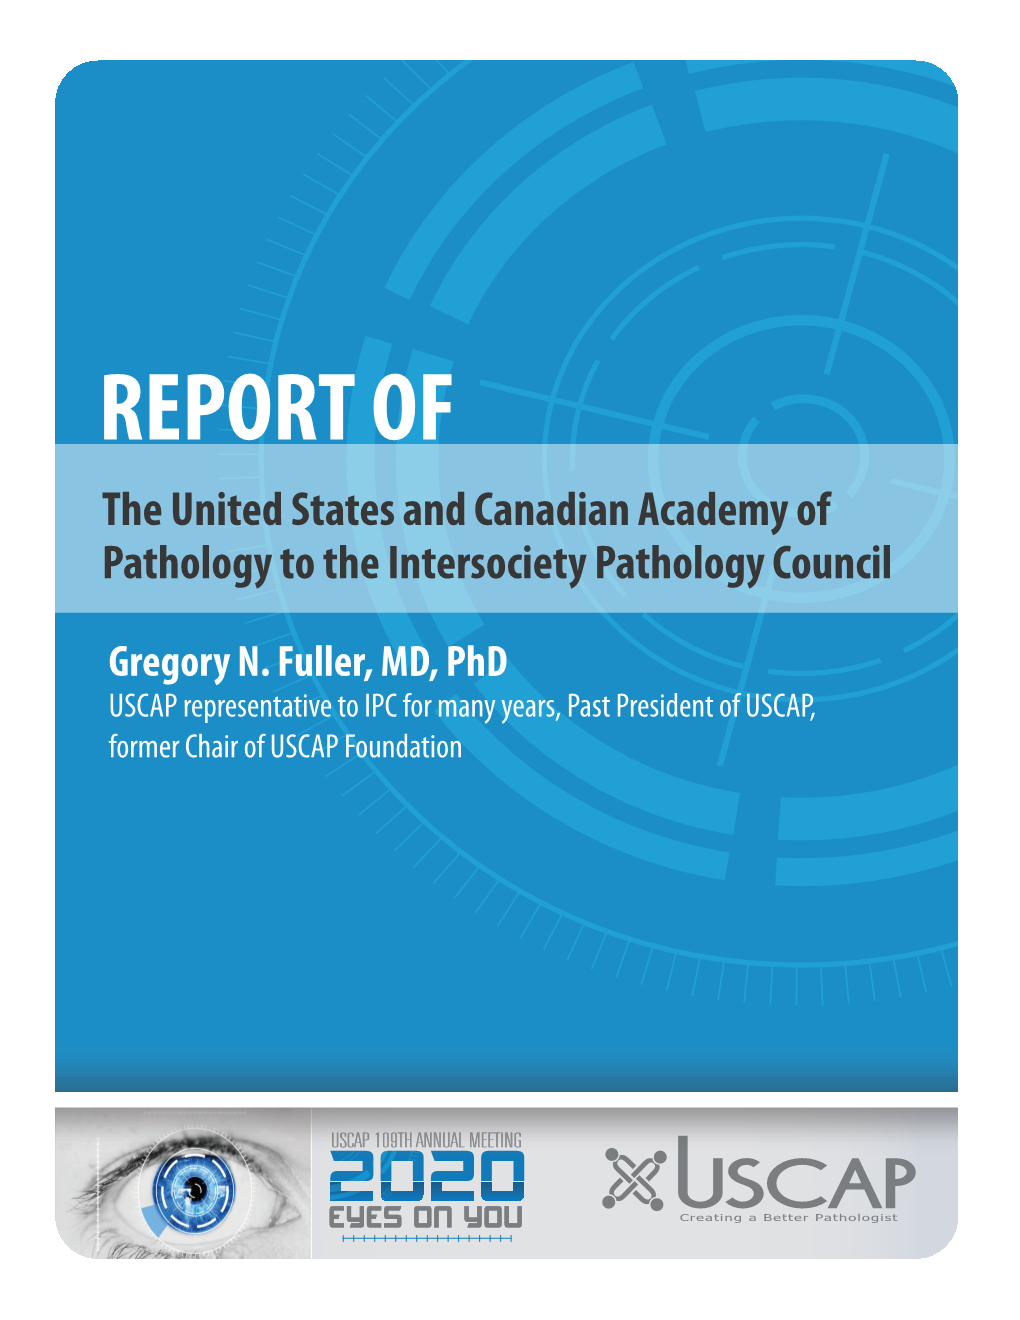 REPORT of the United States and Canadian Academy of Pathology to the Intersociety Pathology Council